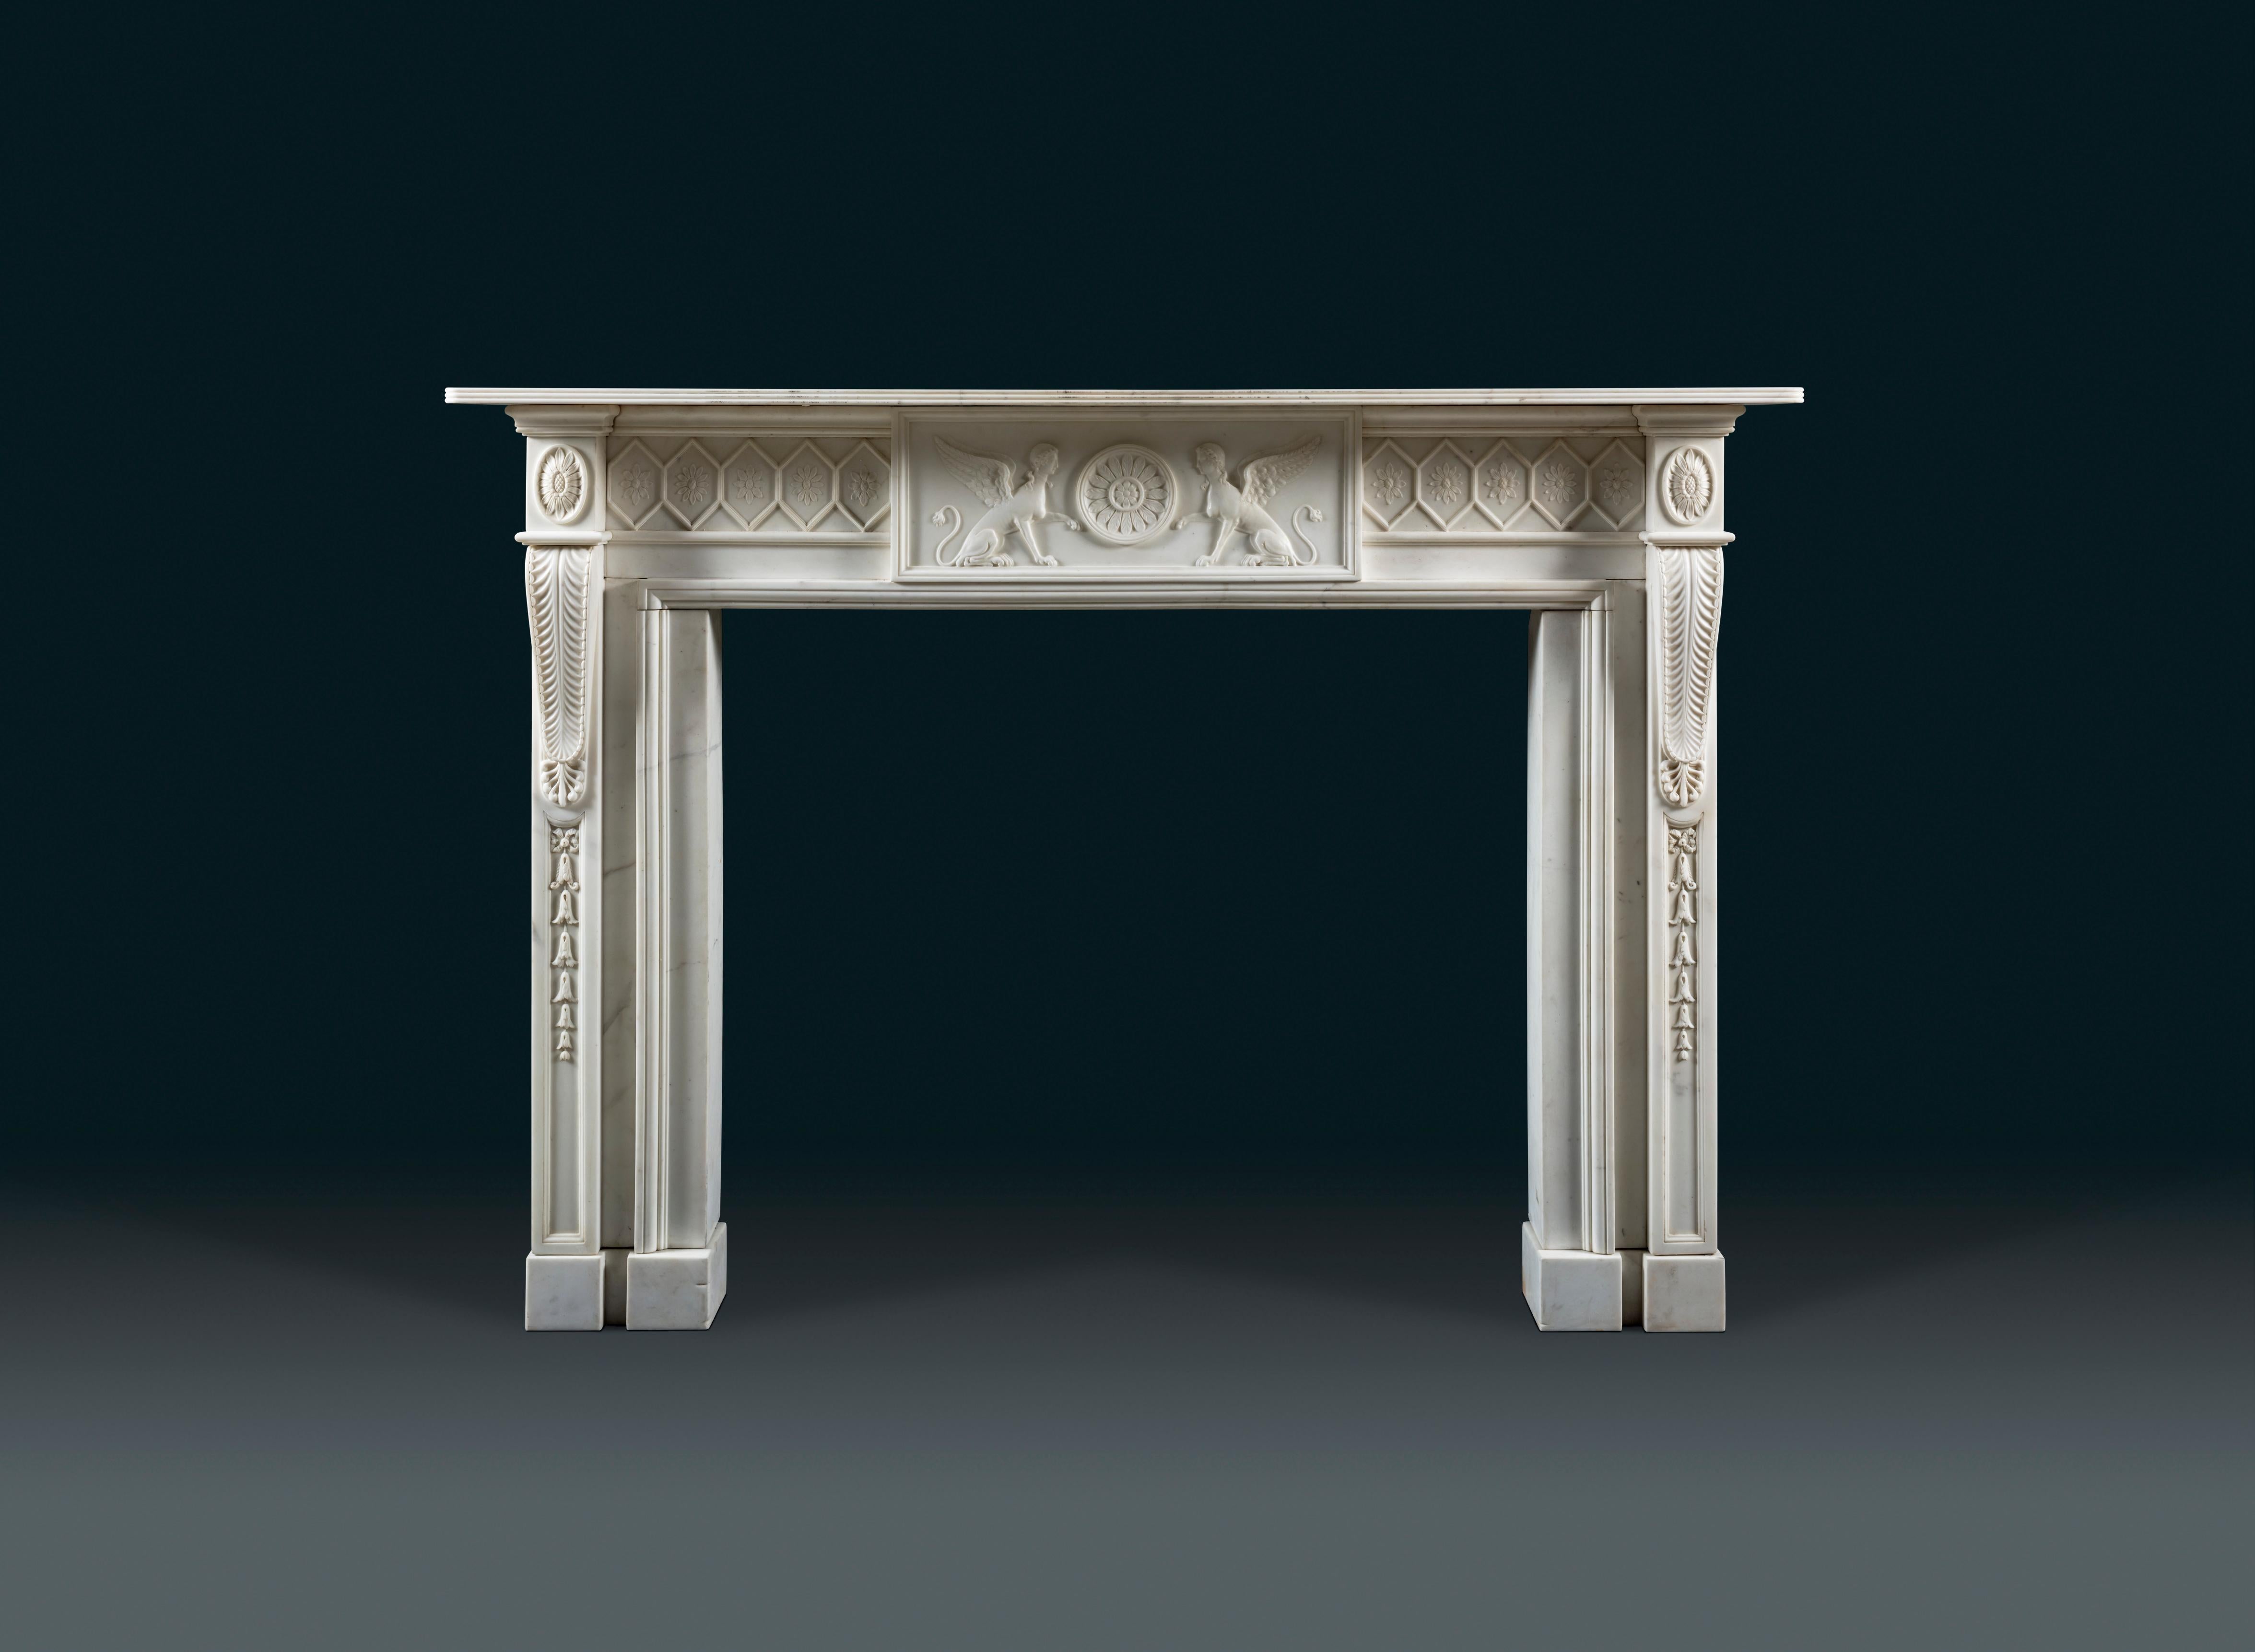 A very refined Adam period chimneypiece carved in white Statuary marble.
The frieze is ornamented with enclosed alternating flowers within lozenge, and with a central tablet depicting two sphinx holding a paterae. The iconography of the sphinx